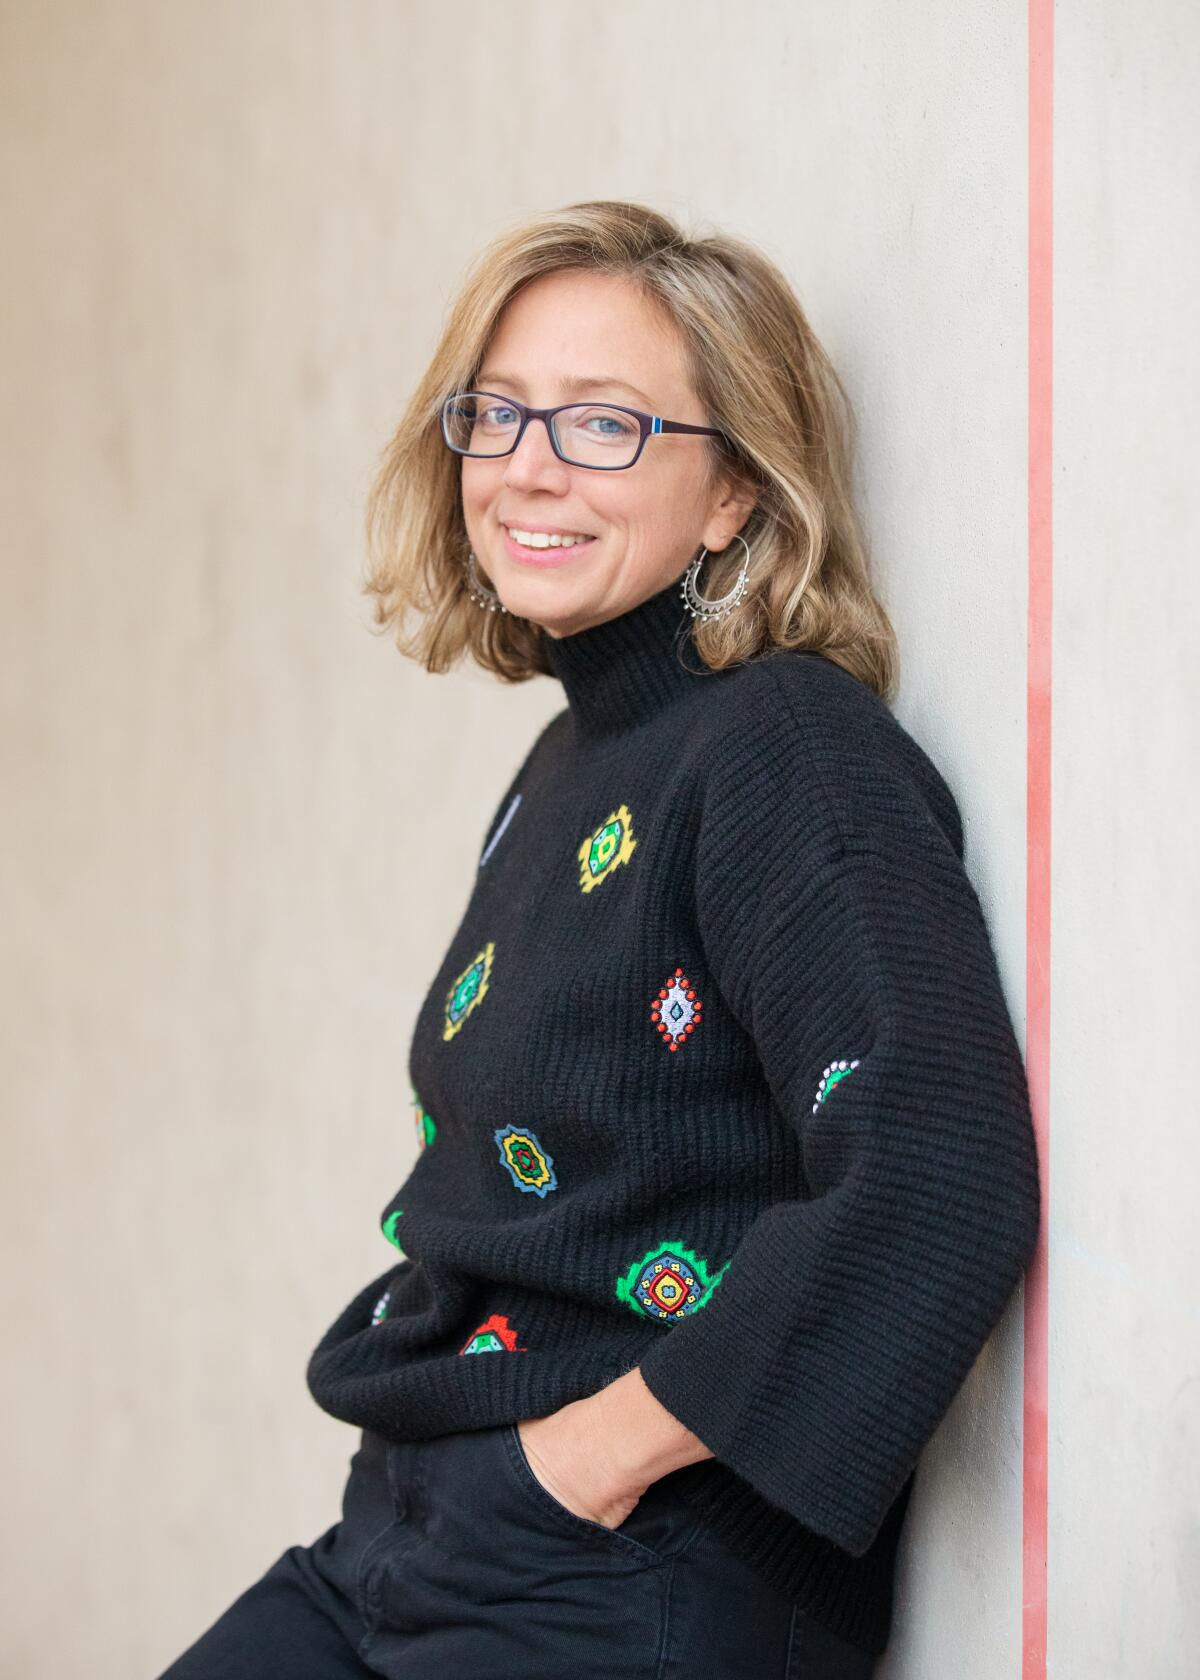 Alexandra Lange, wearing a black patterned sweater, smiles as she leans against a wall.